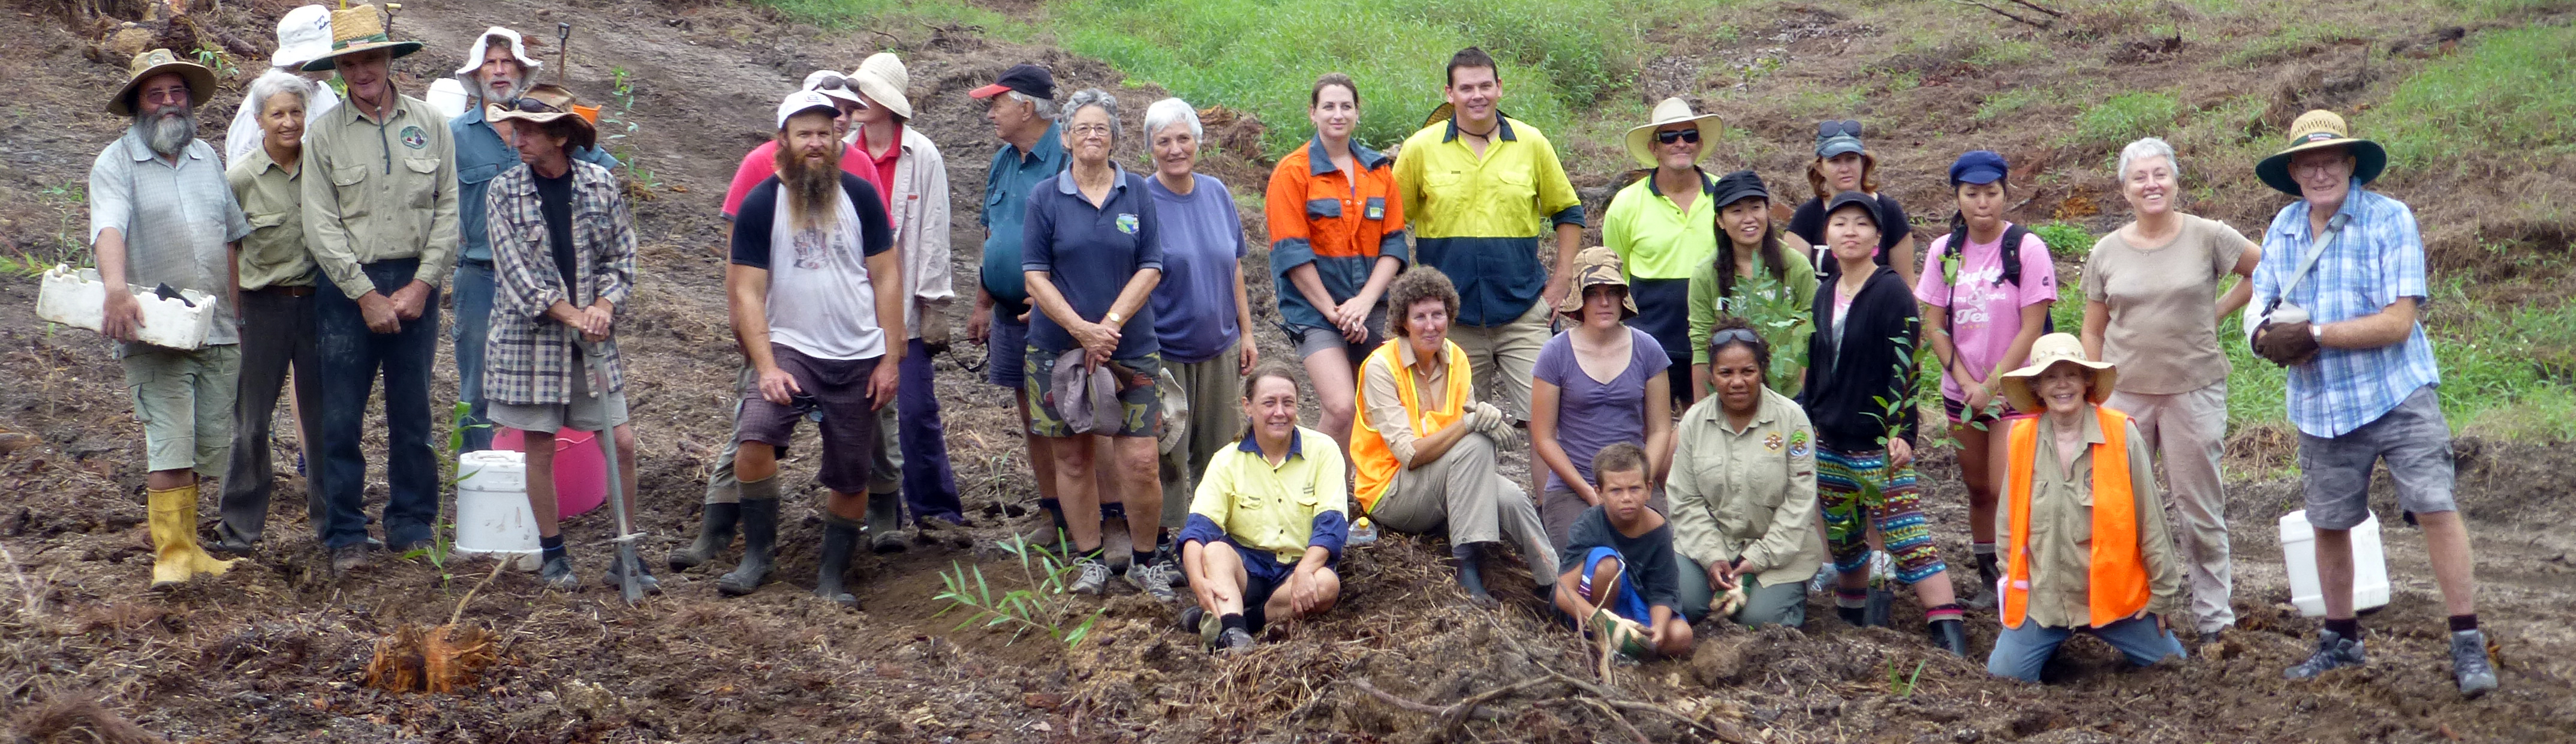 Suzie (seated) front and centre at a mahogany glider corridor re-planting  after the devastation of  Cyclone Yasi in 2011.